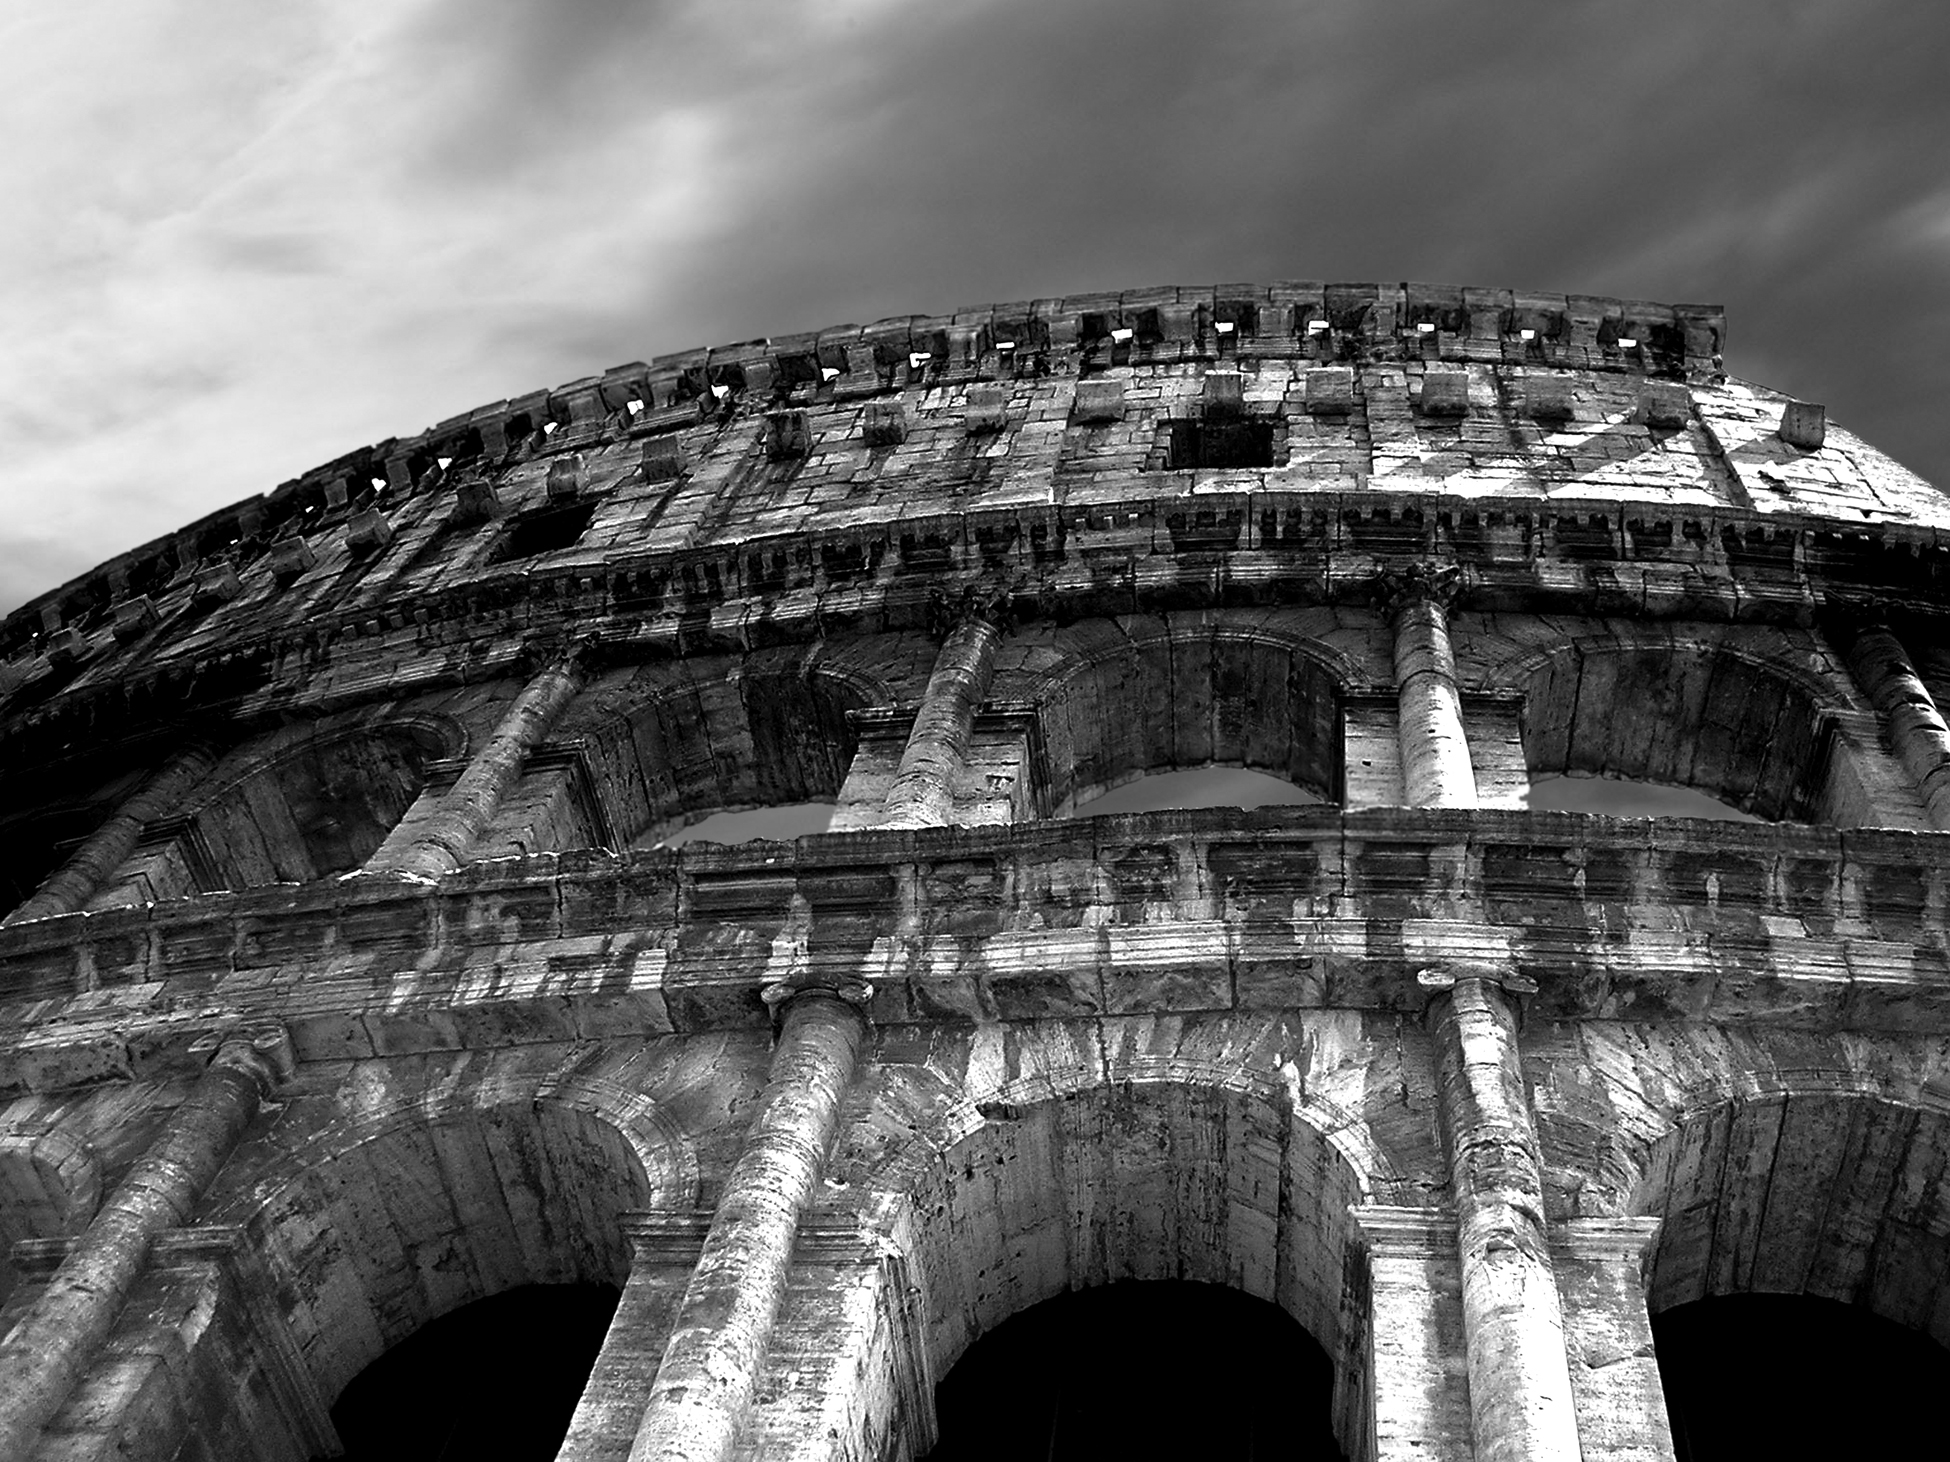 The Colosseum and Ancient City: A taste of Ancient Rome